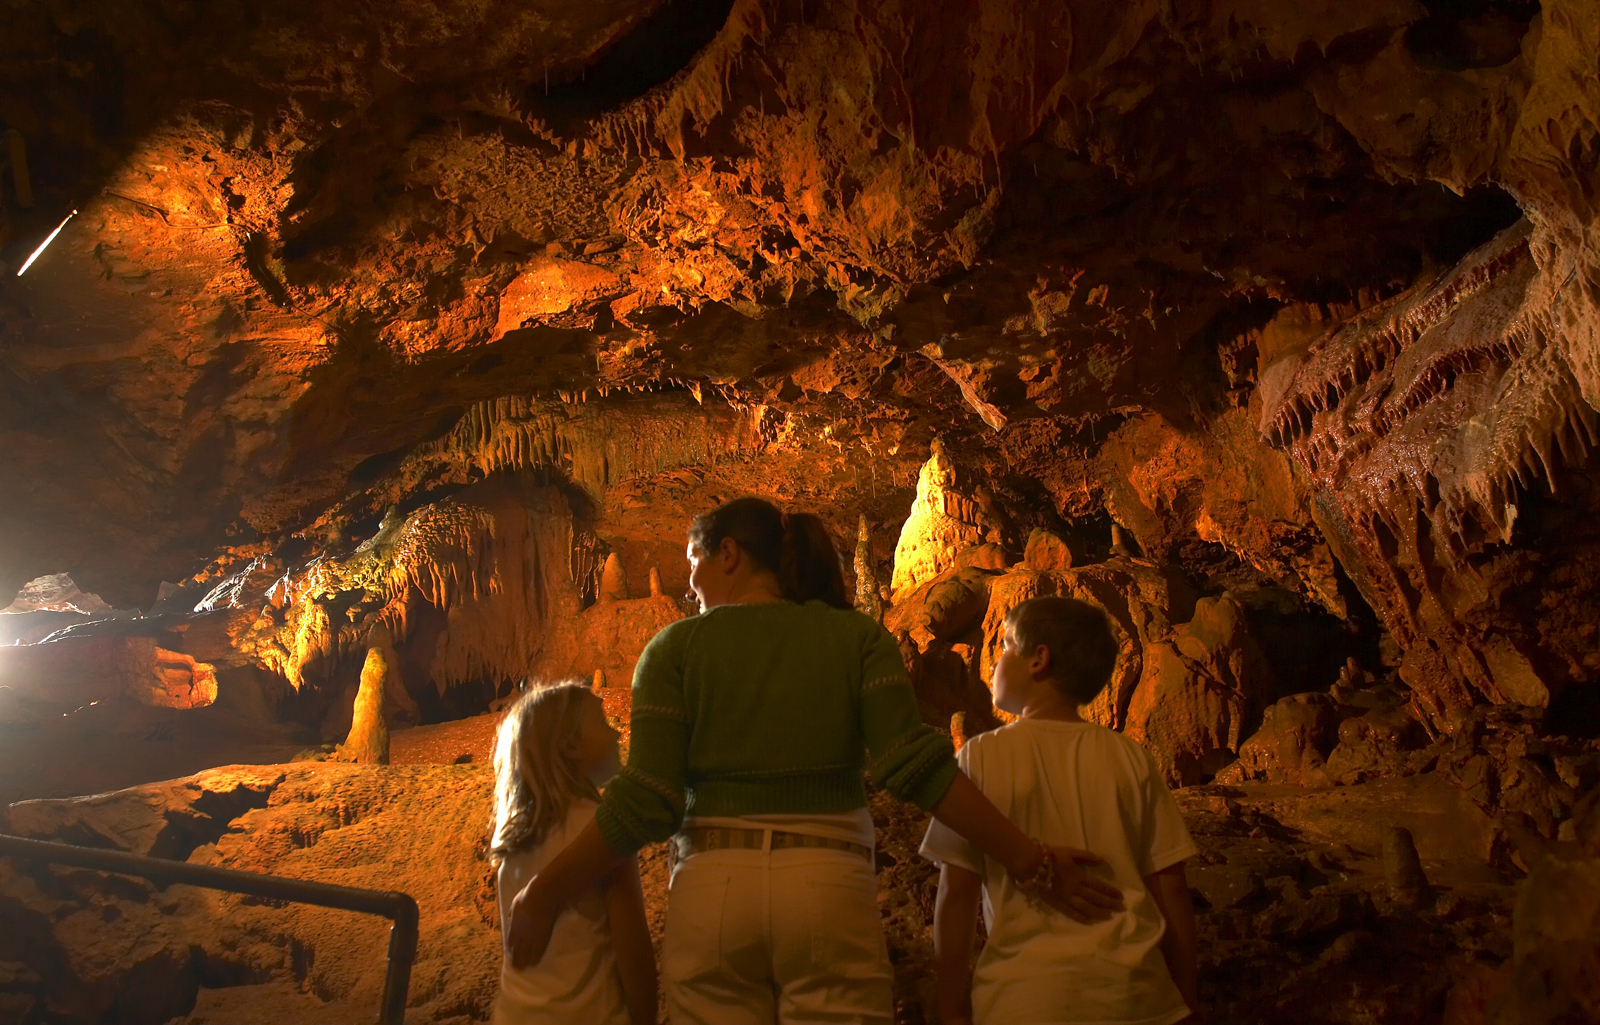 Kent's Cavern in Torquay an ideal place to visit when on a short break on The English Riviera.